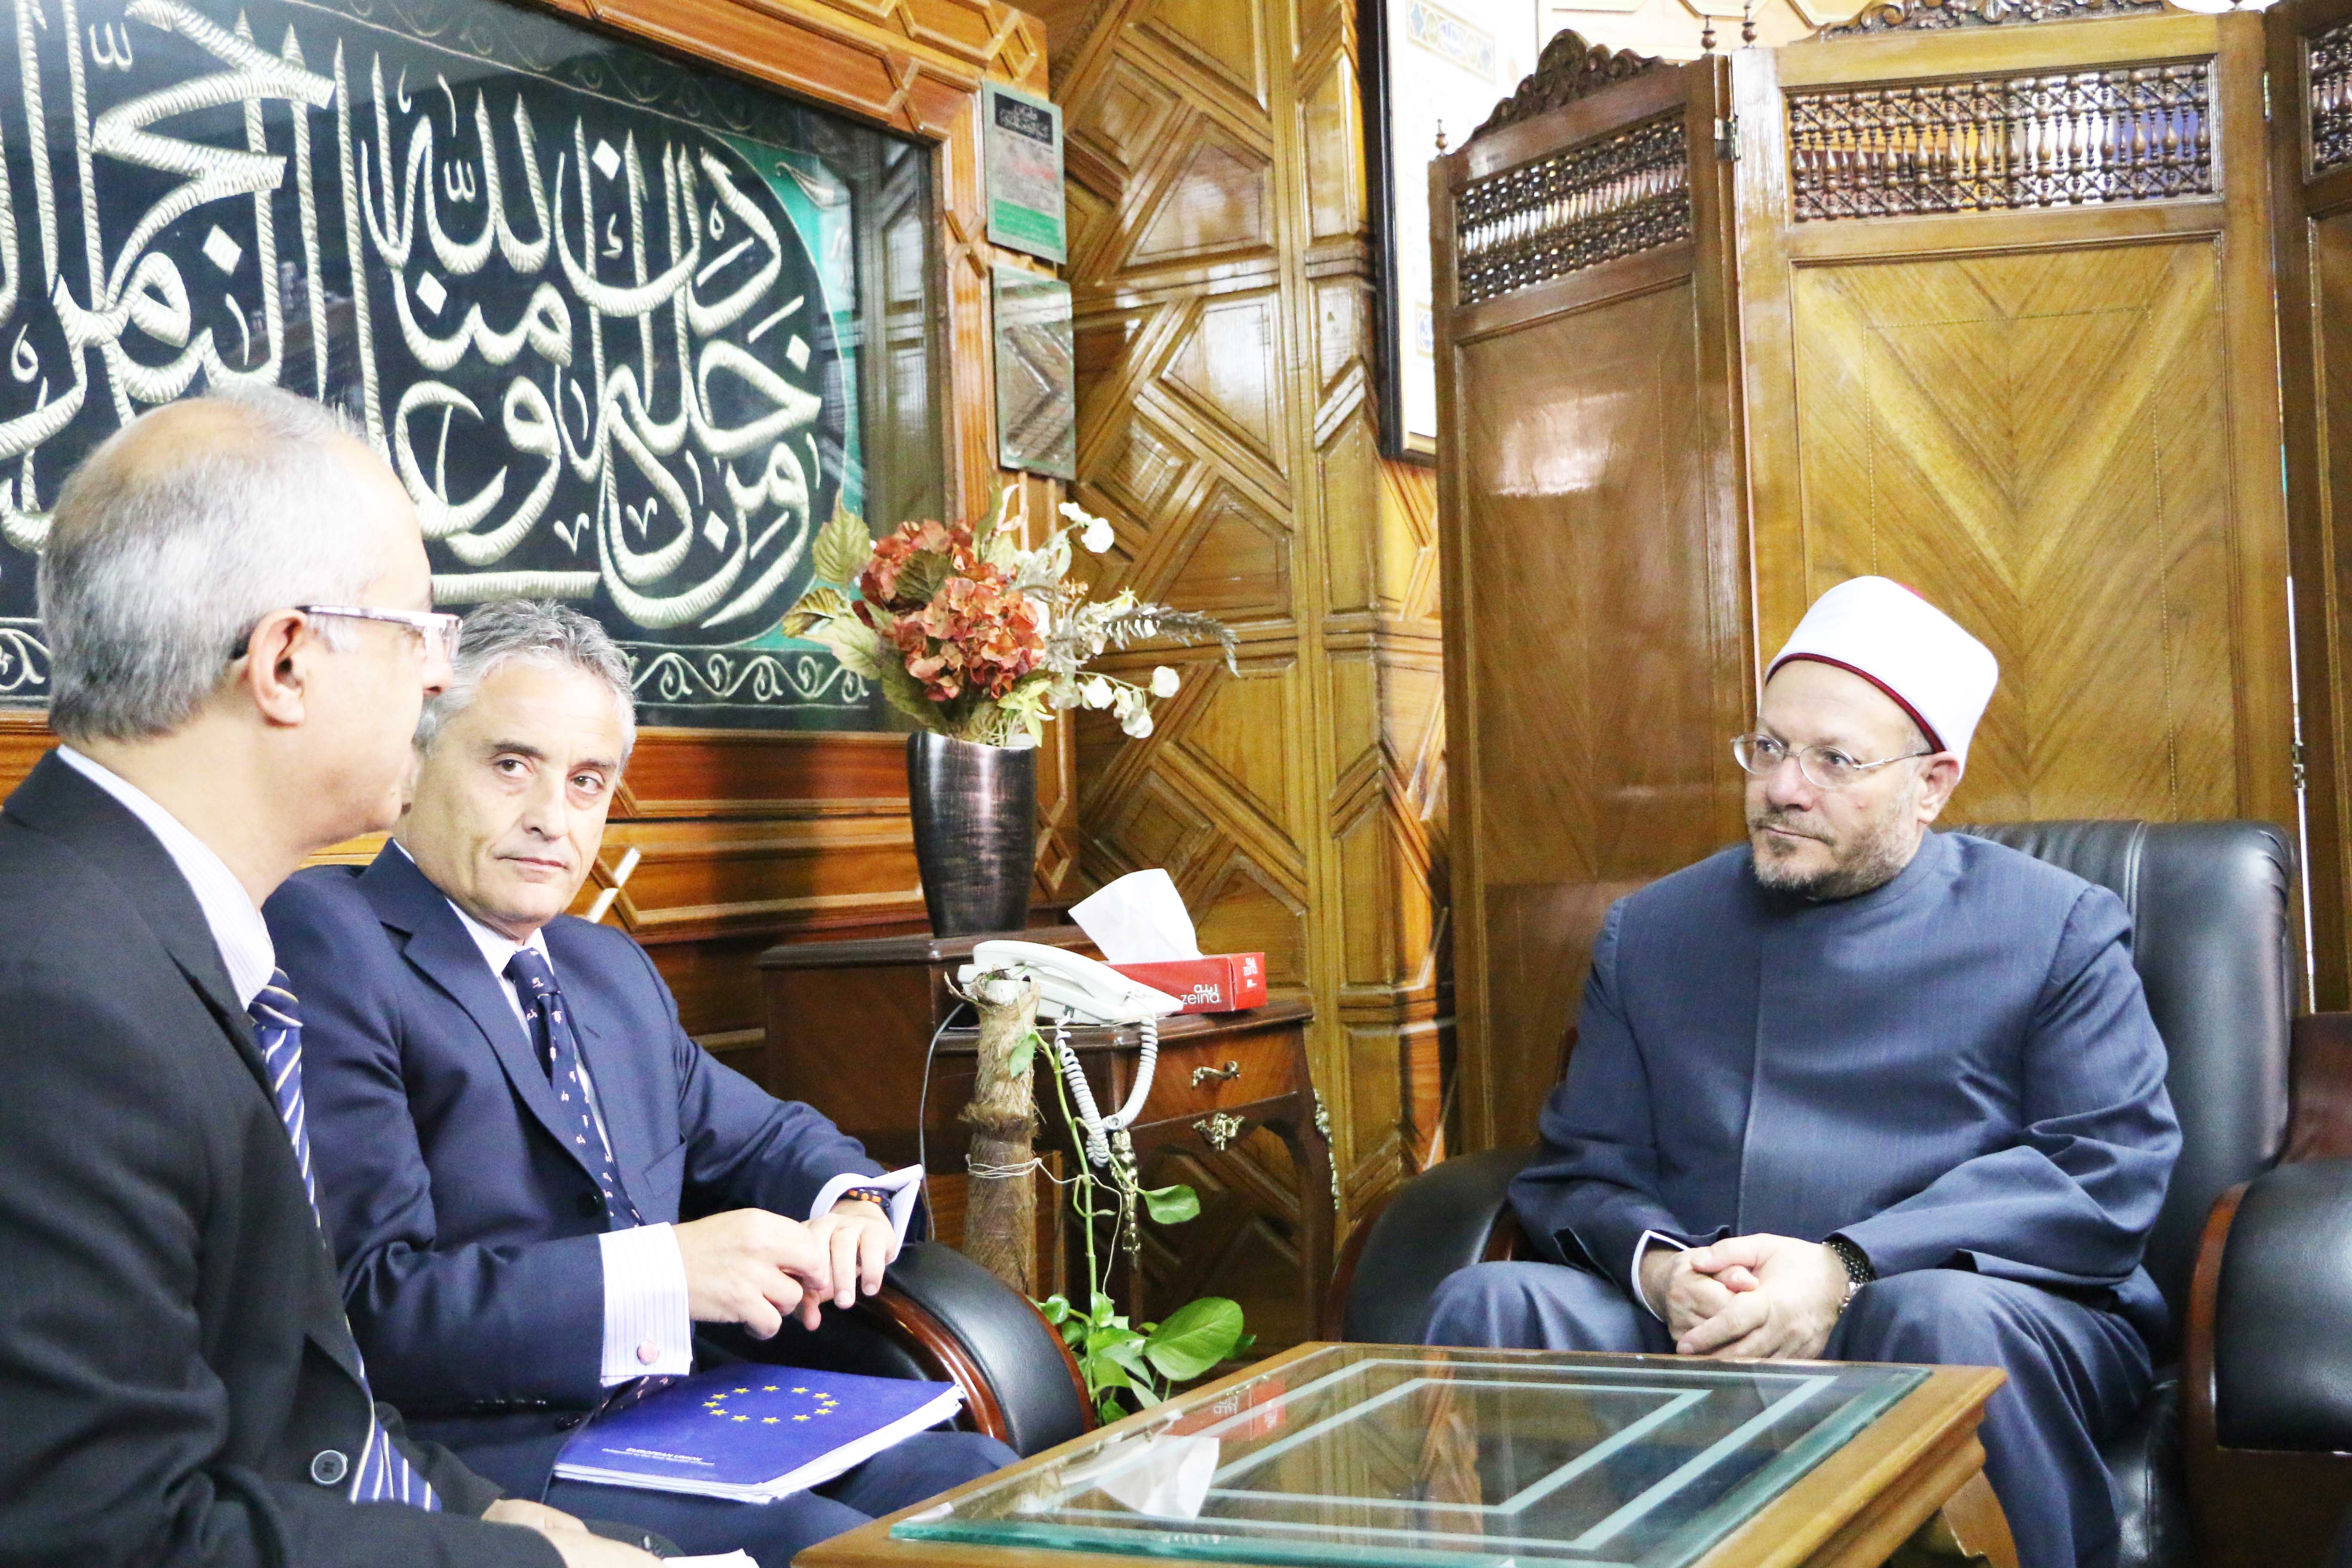 The Italian government invites the Grand Mufti to visit Italy to investigate methods of combating terrorism